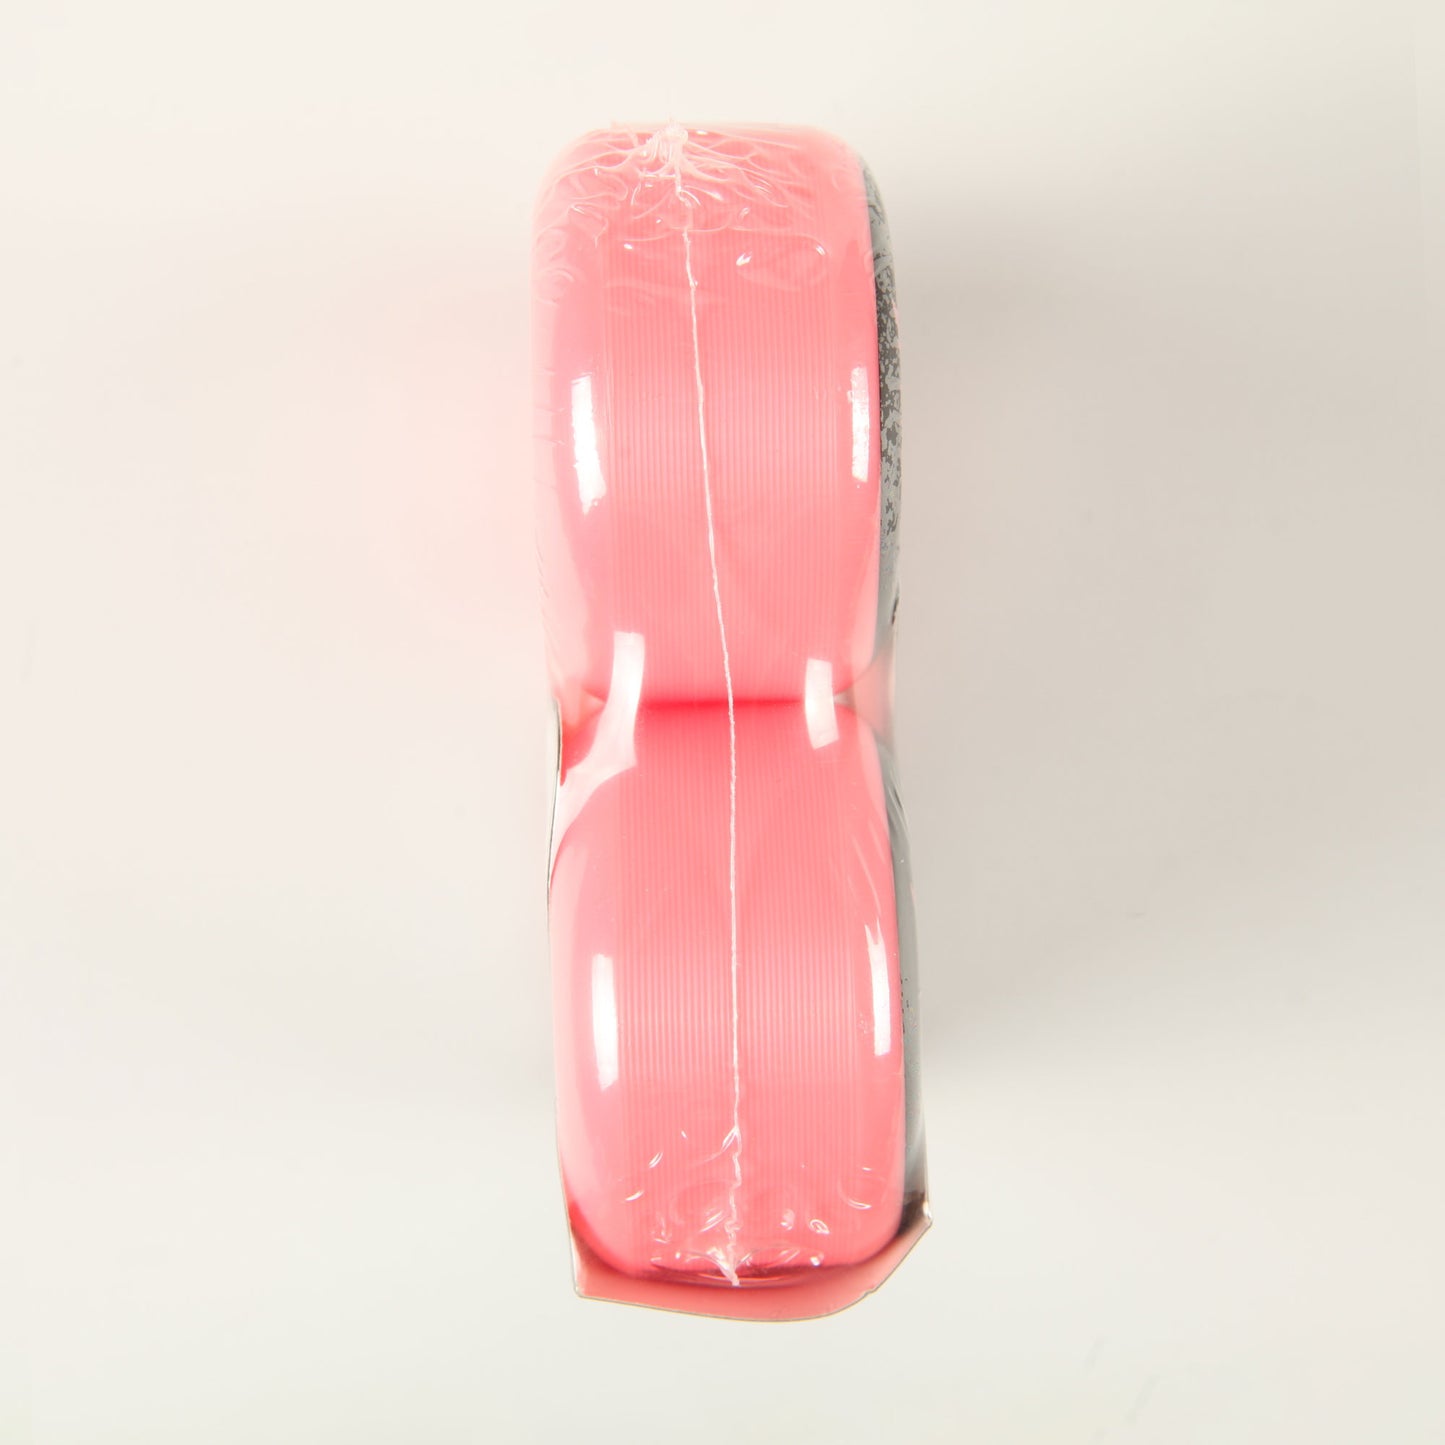 Orbs 'Specters Solids' 56mm 99A Wheels (Coral)